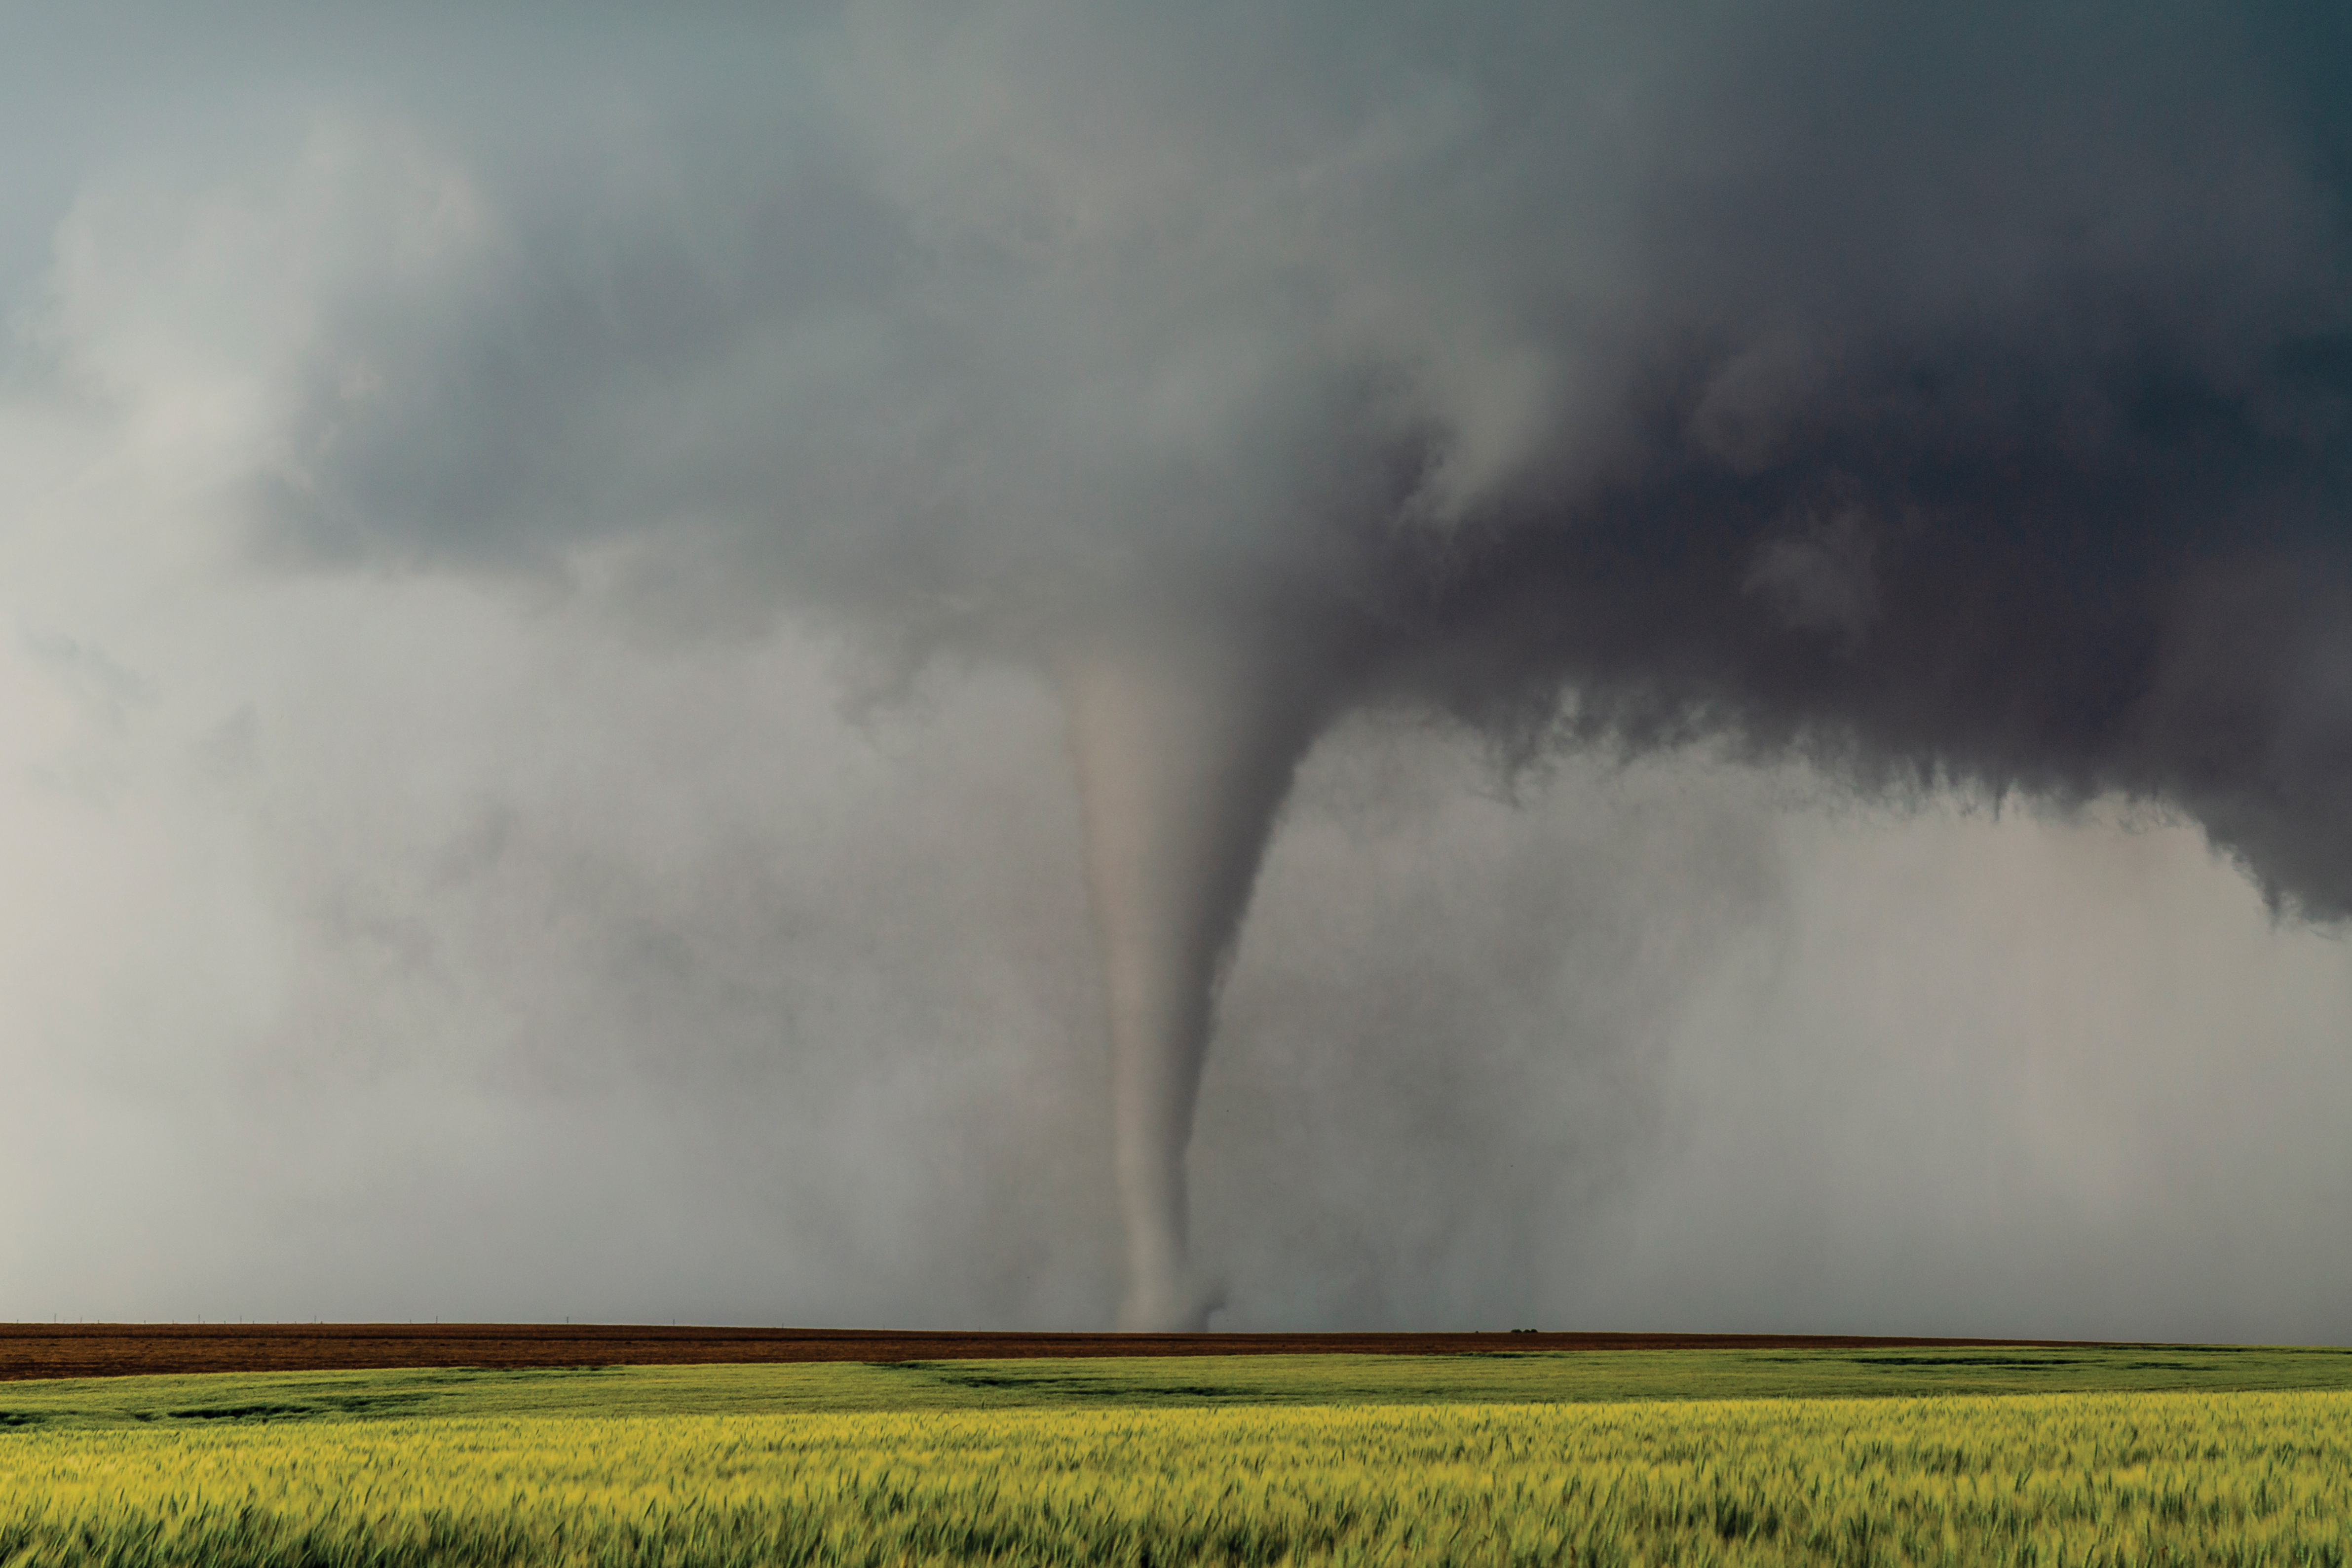 an image of a tornado touching down in a field